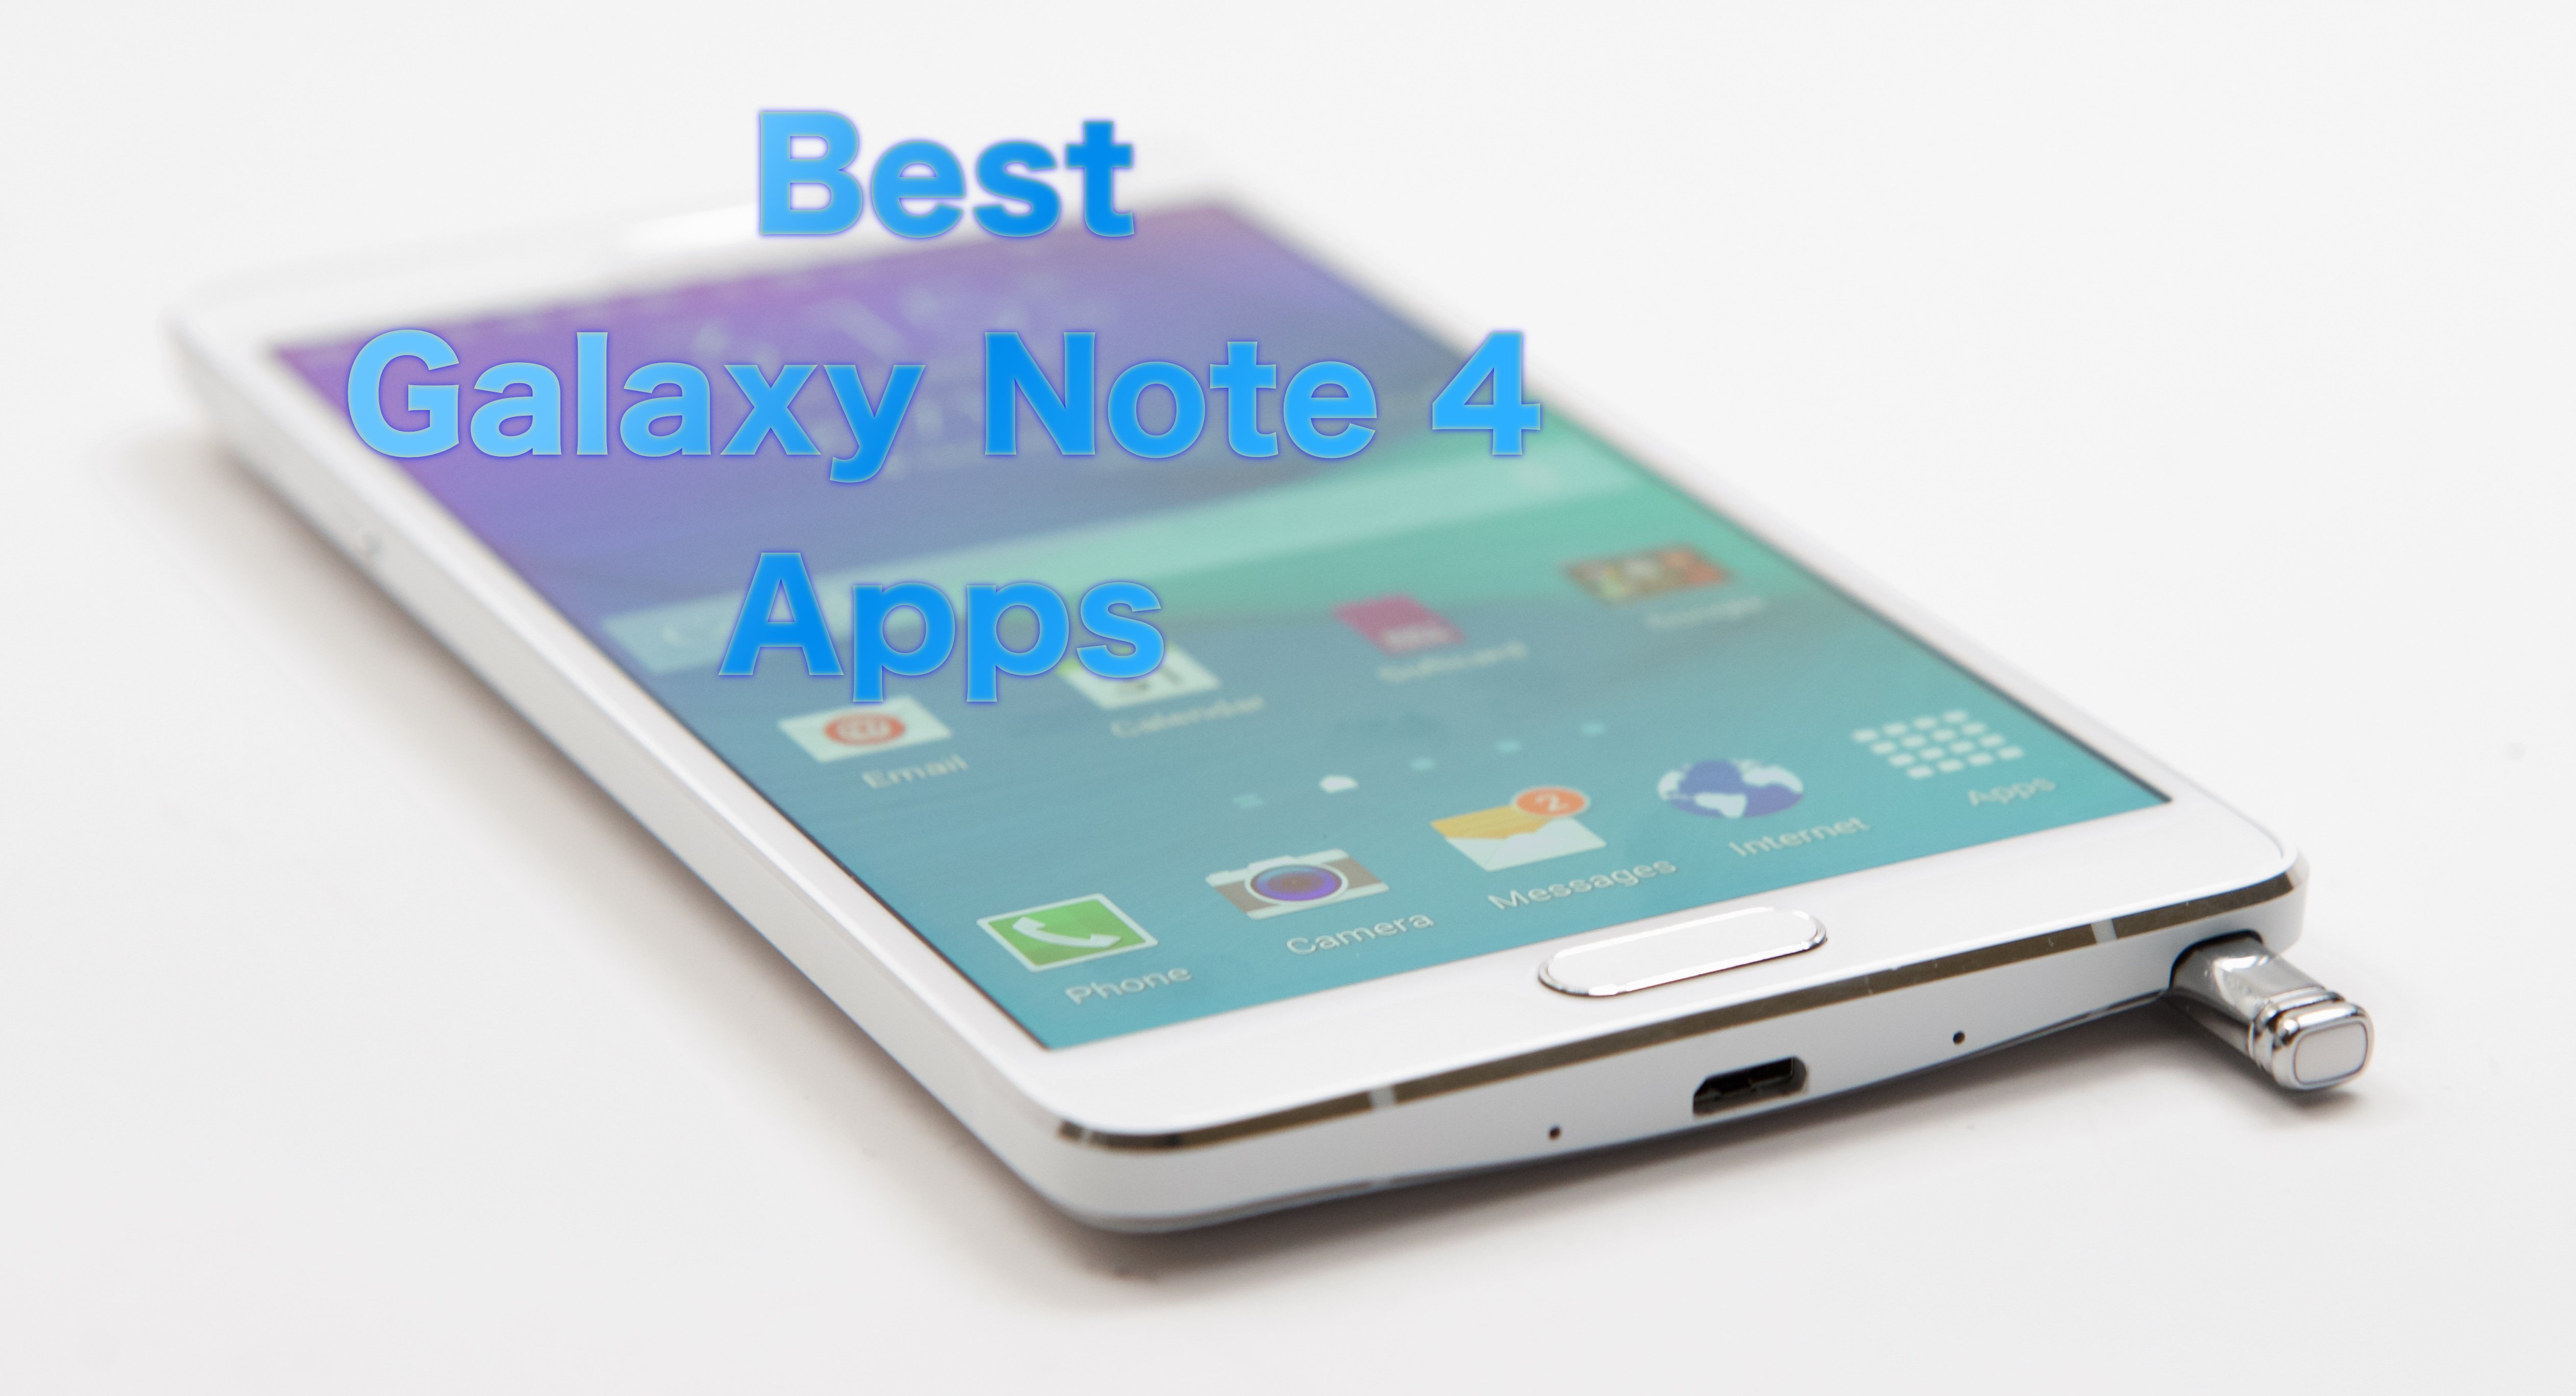 Download the best Galaxy Note 4 apps today.